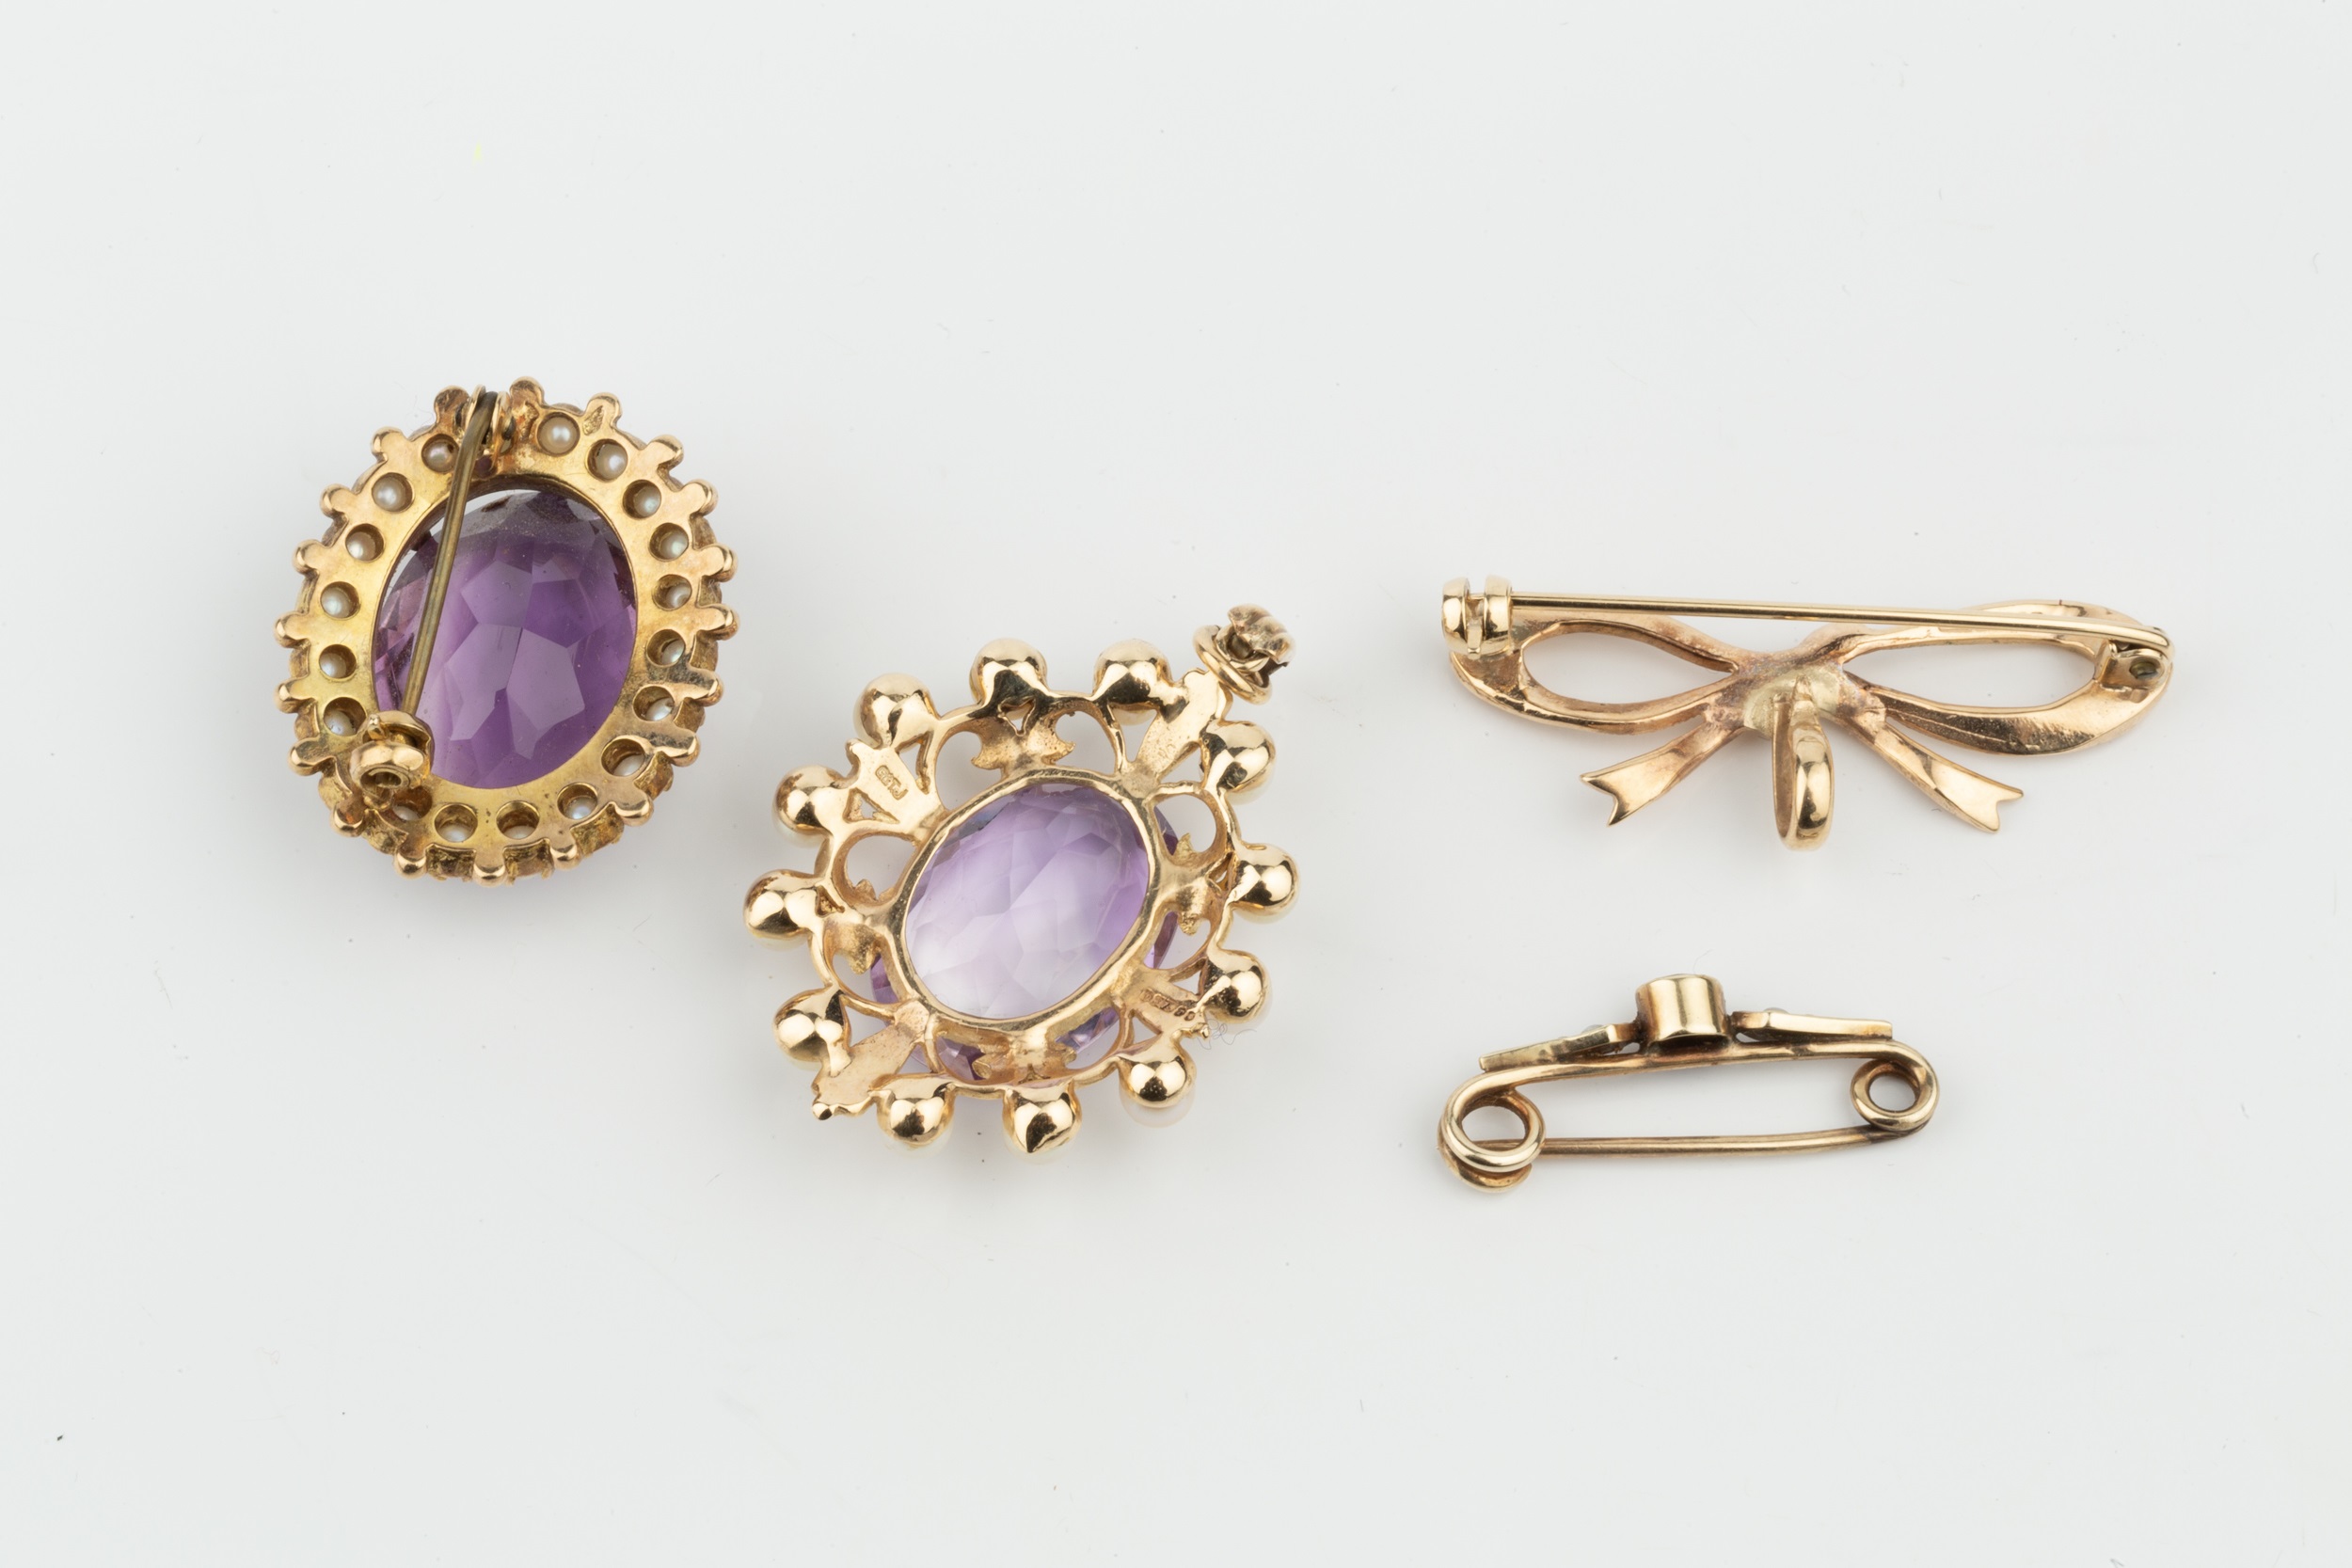 An amethyst and cultured pearl oval pendant, the oval cut amethyst set in 9ct gold with a border - Image 2 of 2